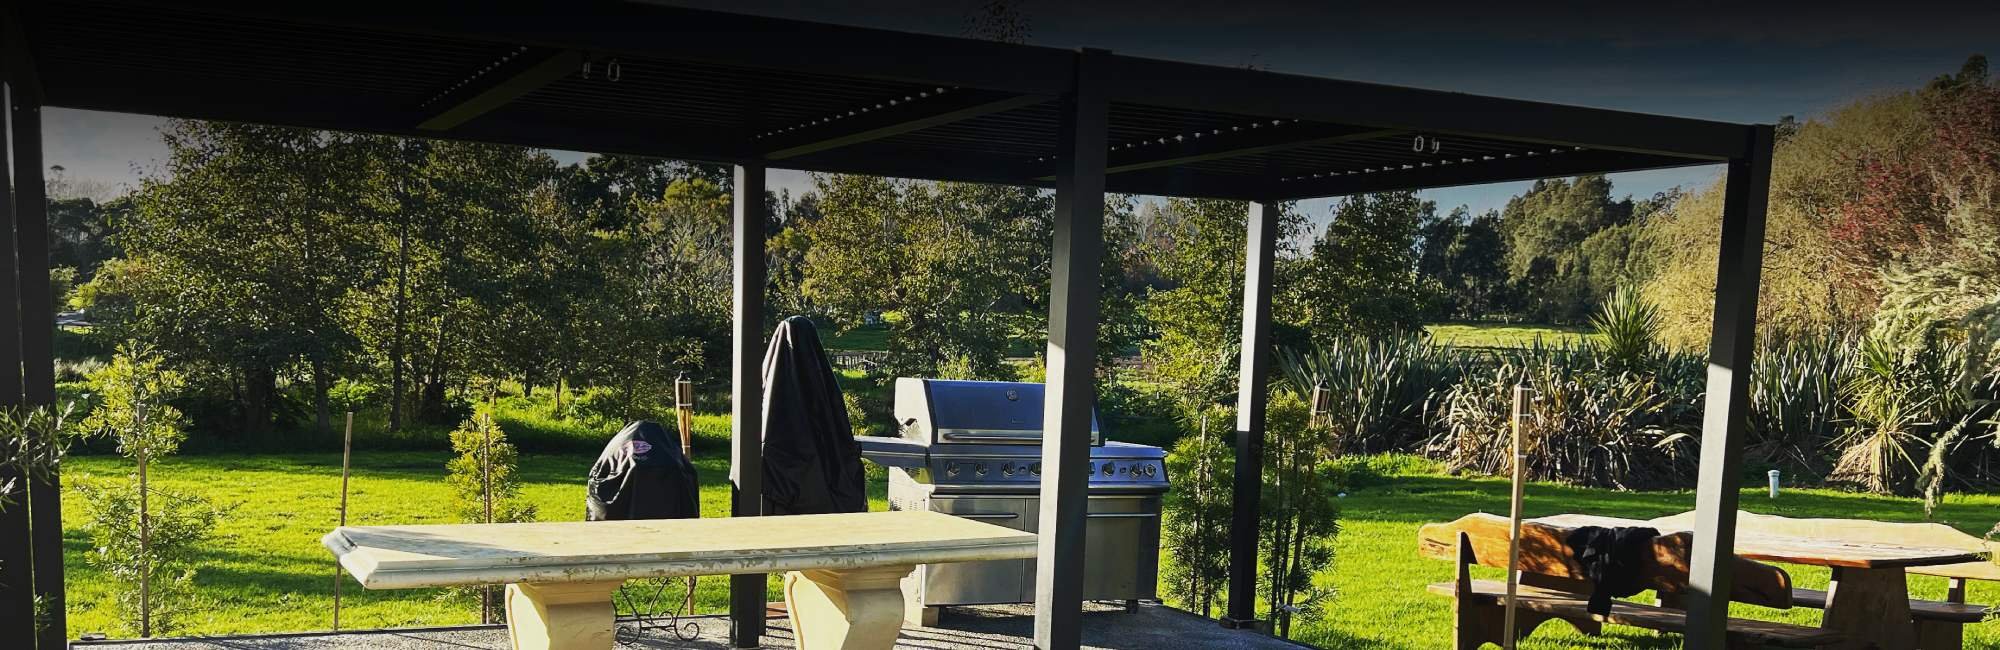 Outdoor canopied barbeque area with heaps of room for dining outside with the vibrant green lawn and surrounding trees